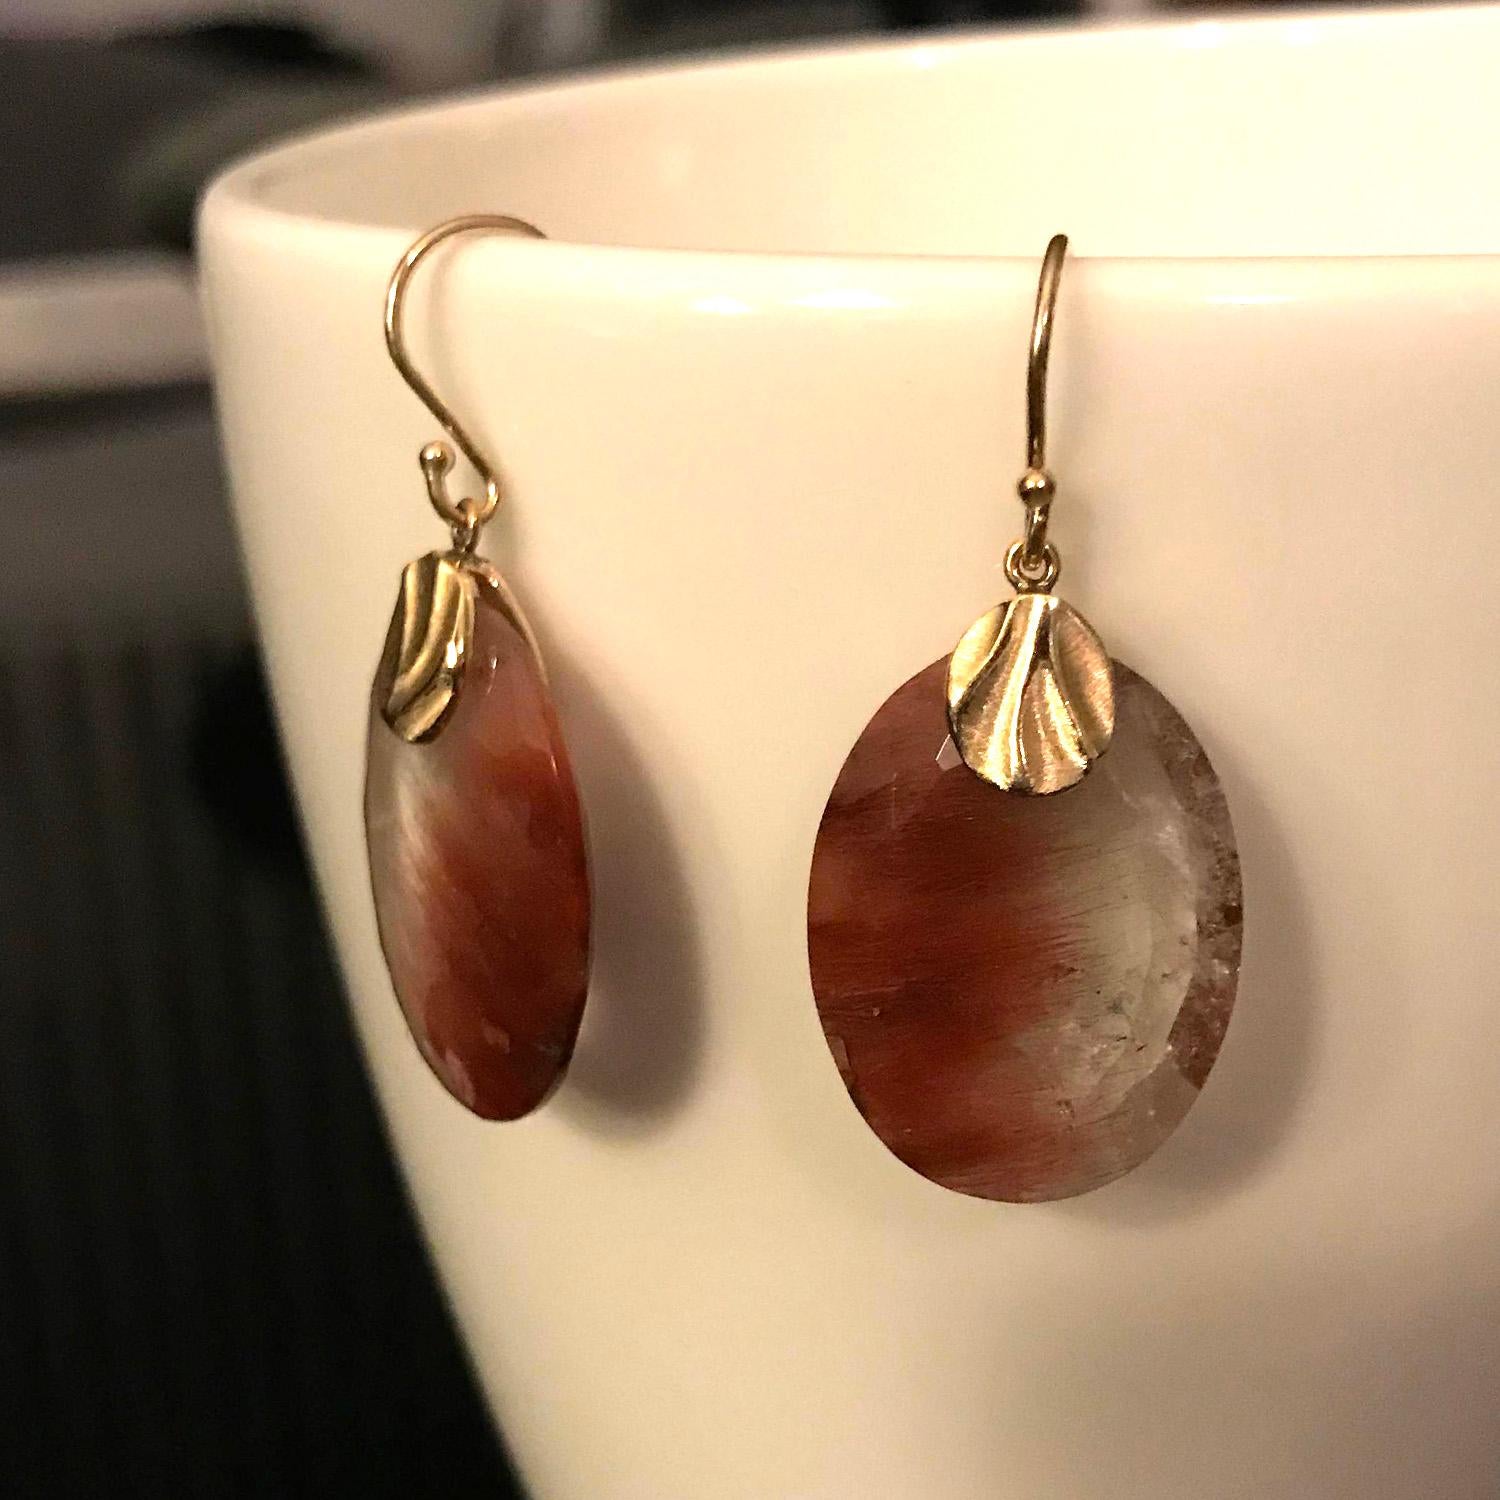 Contemporary Dangle Earrings with 29.27 Carat Red Rutilated Quartz and a 14 Karat Gold Cap